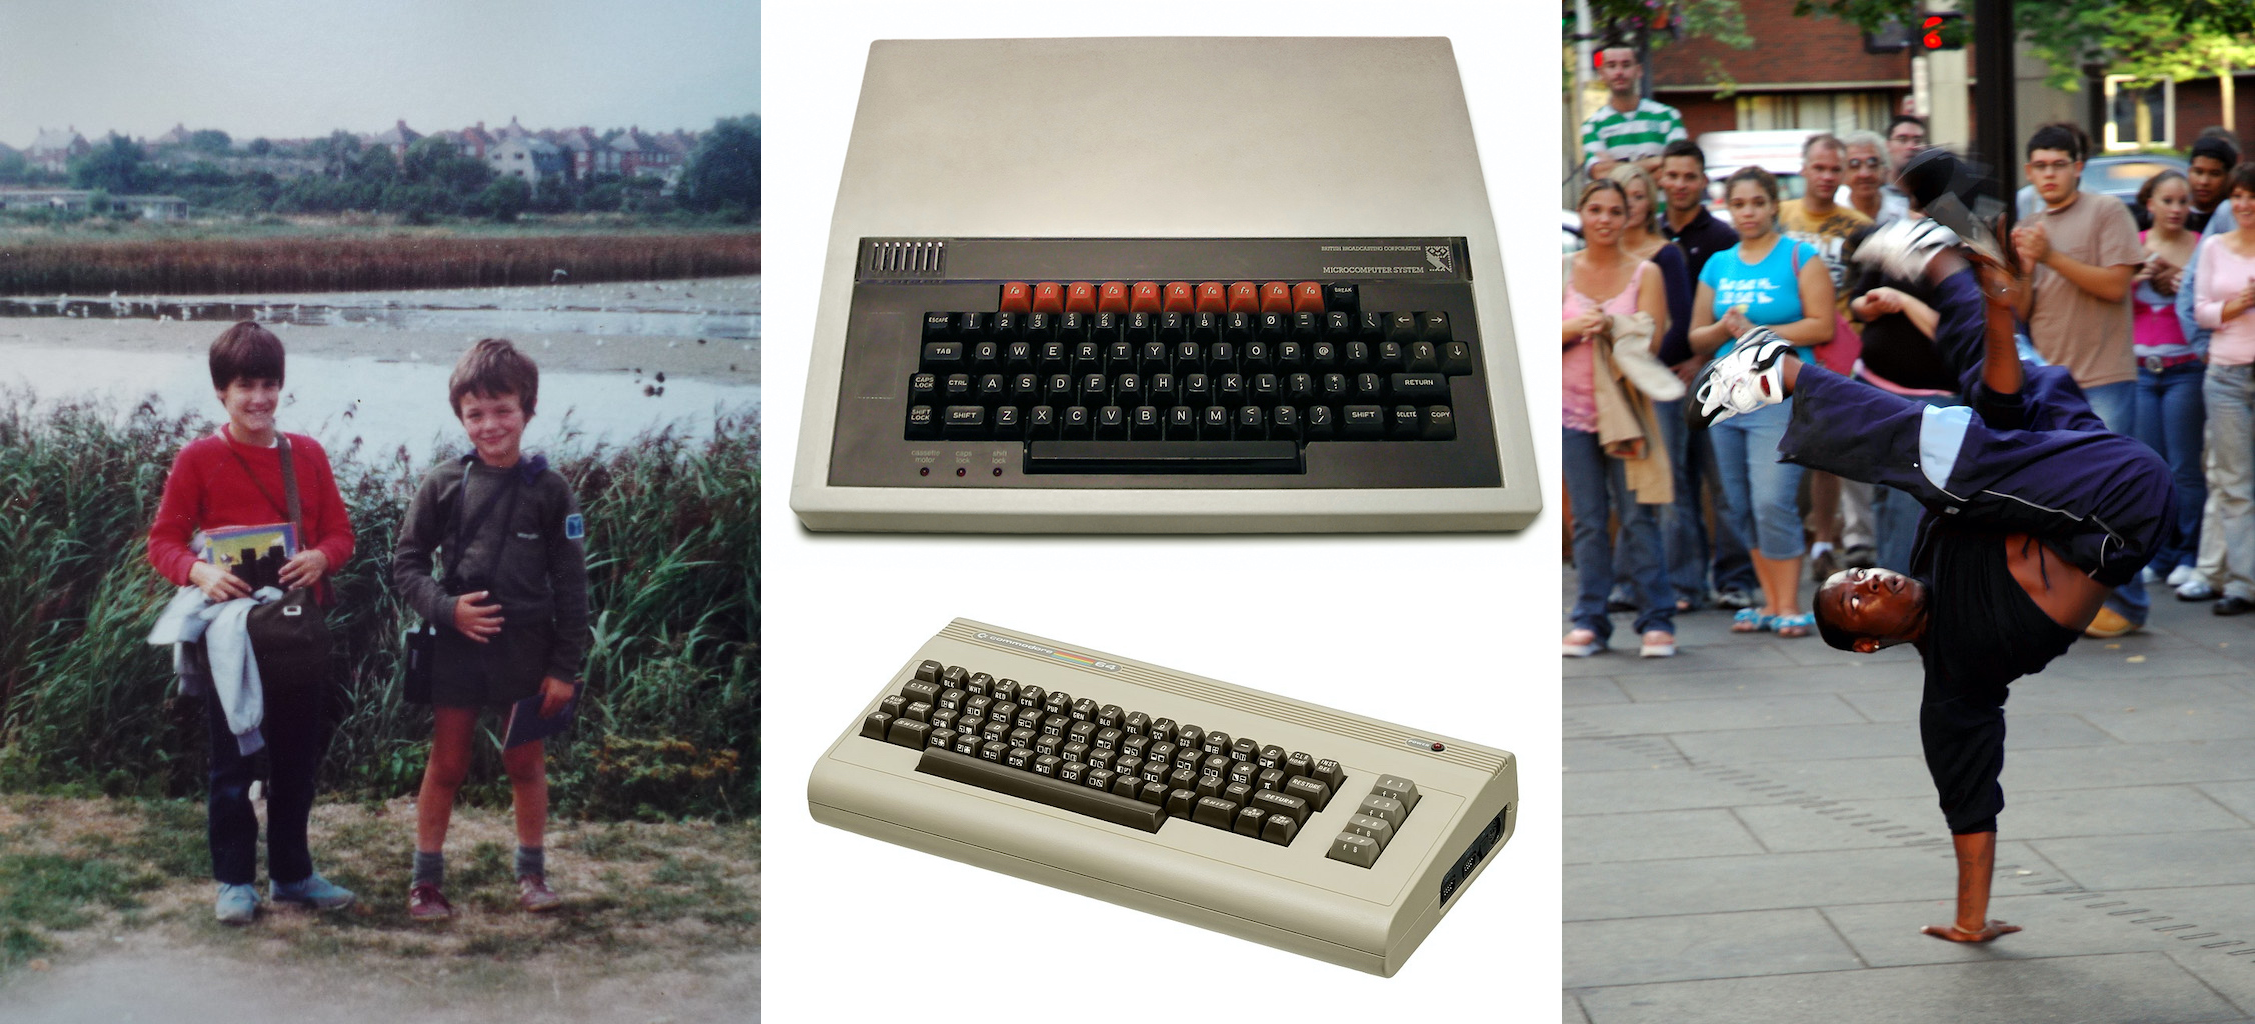 From left to right: LEFT: Birdwatching at Radipole Lake in Weymouth, Dorset with Branwen (left) and me (right), members of the Young Ornithologists’ Club (YOC). MIDDLE: (Top) A BBC Micro (model A) from our after school code club with 16KB of memory. Public domain picture by Stuart Brady on Wikimedia Commons w.wiki/6cfw (Bottom) Branwen’s Commodore 64 with whopping 64KB (yes, kilobytes) of memory, it was four times more powerful than the schools BBC Micro, public domain picture by Evan Amos on Wikimedia Commons w.wiki/6ait. RIGHT: When we weren’t birdwatching or computing we were breakdancing. CC BY portrait of a breakdancer via Wikimedia Commons w.wiki/6cfx. Yes we are geeky and yes, we’ll always wear our geek badges with pride! Blessed are the geeks, see section 1.6.